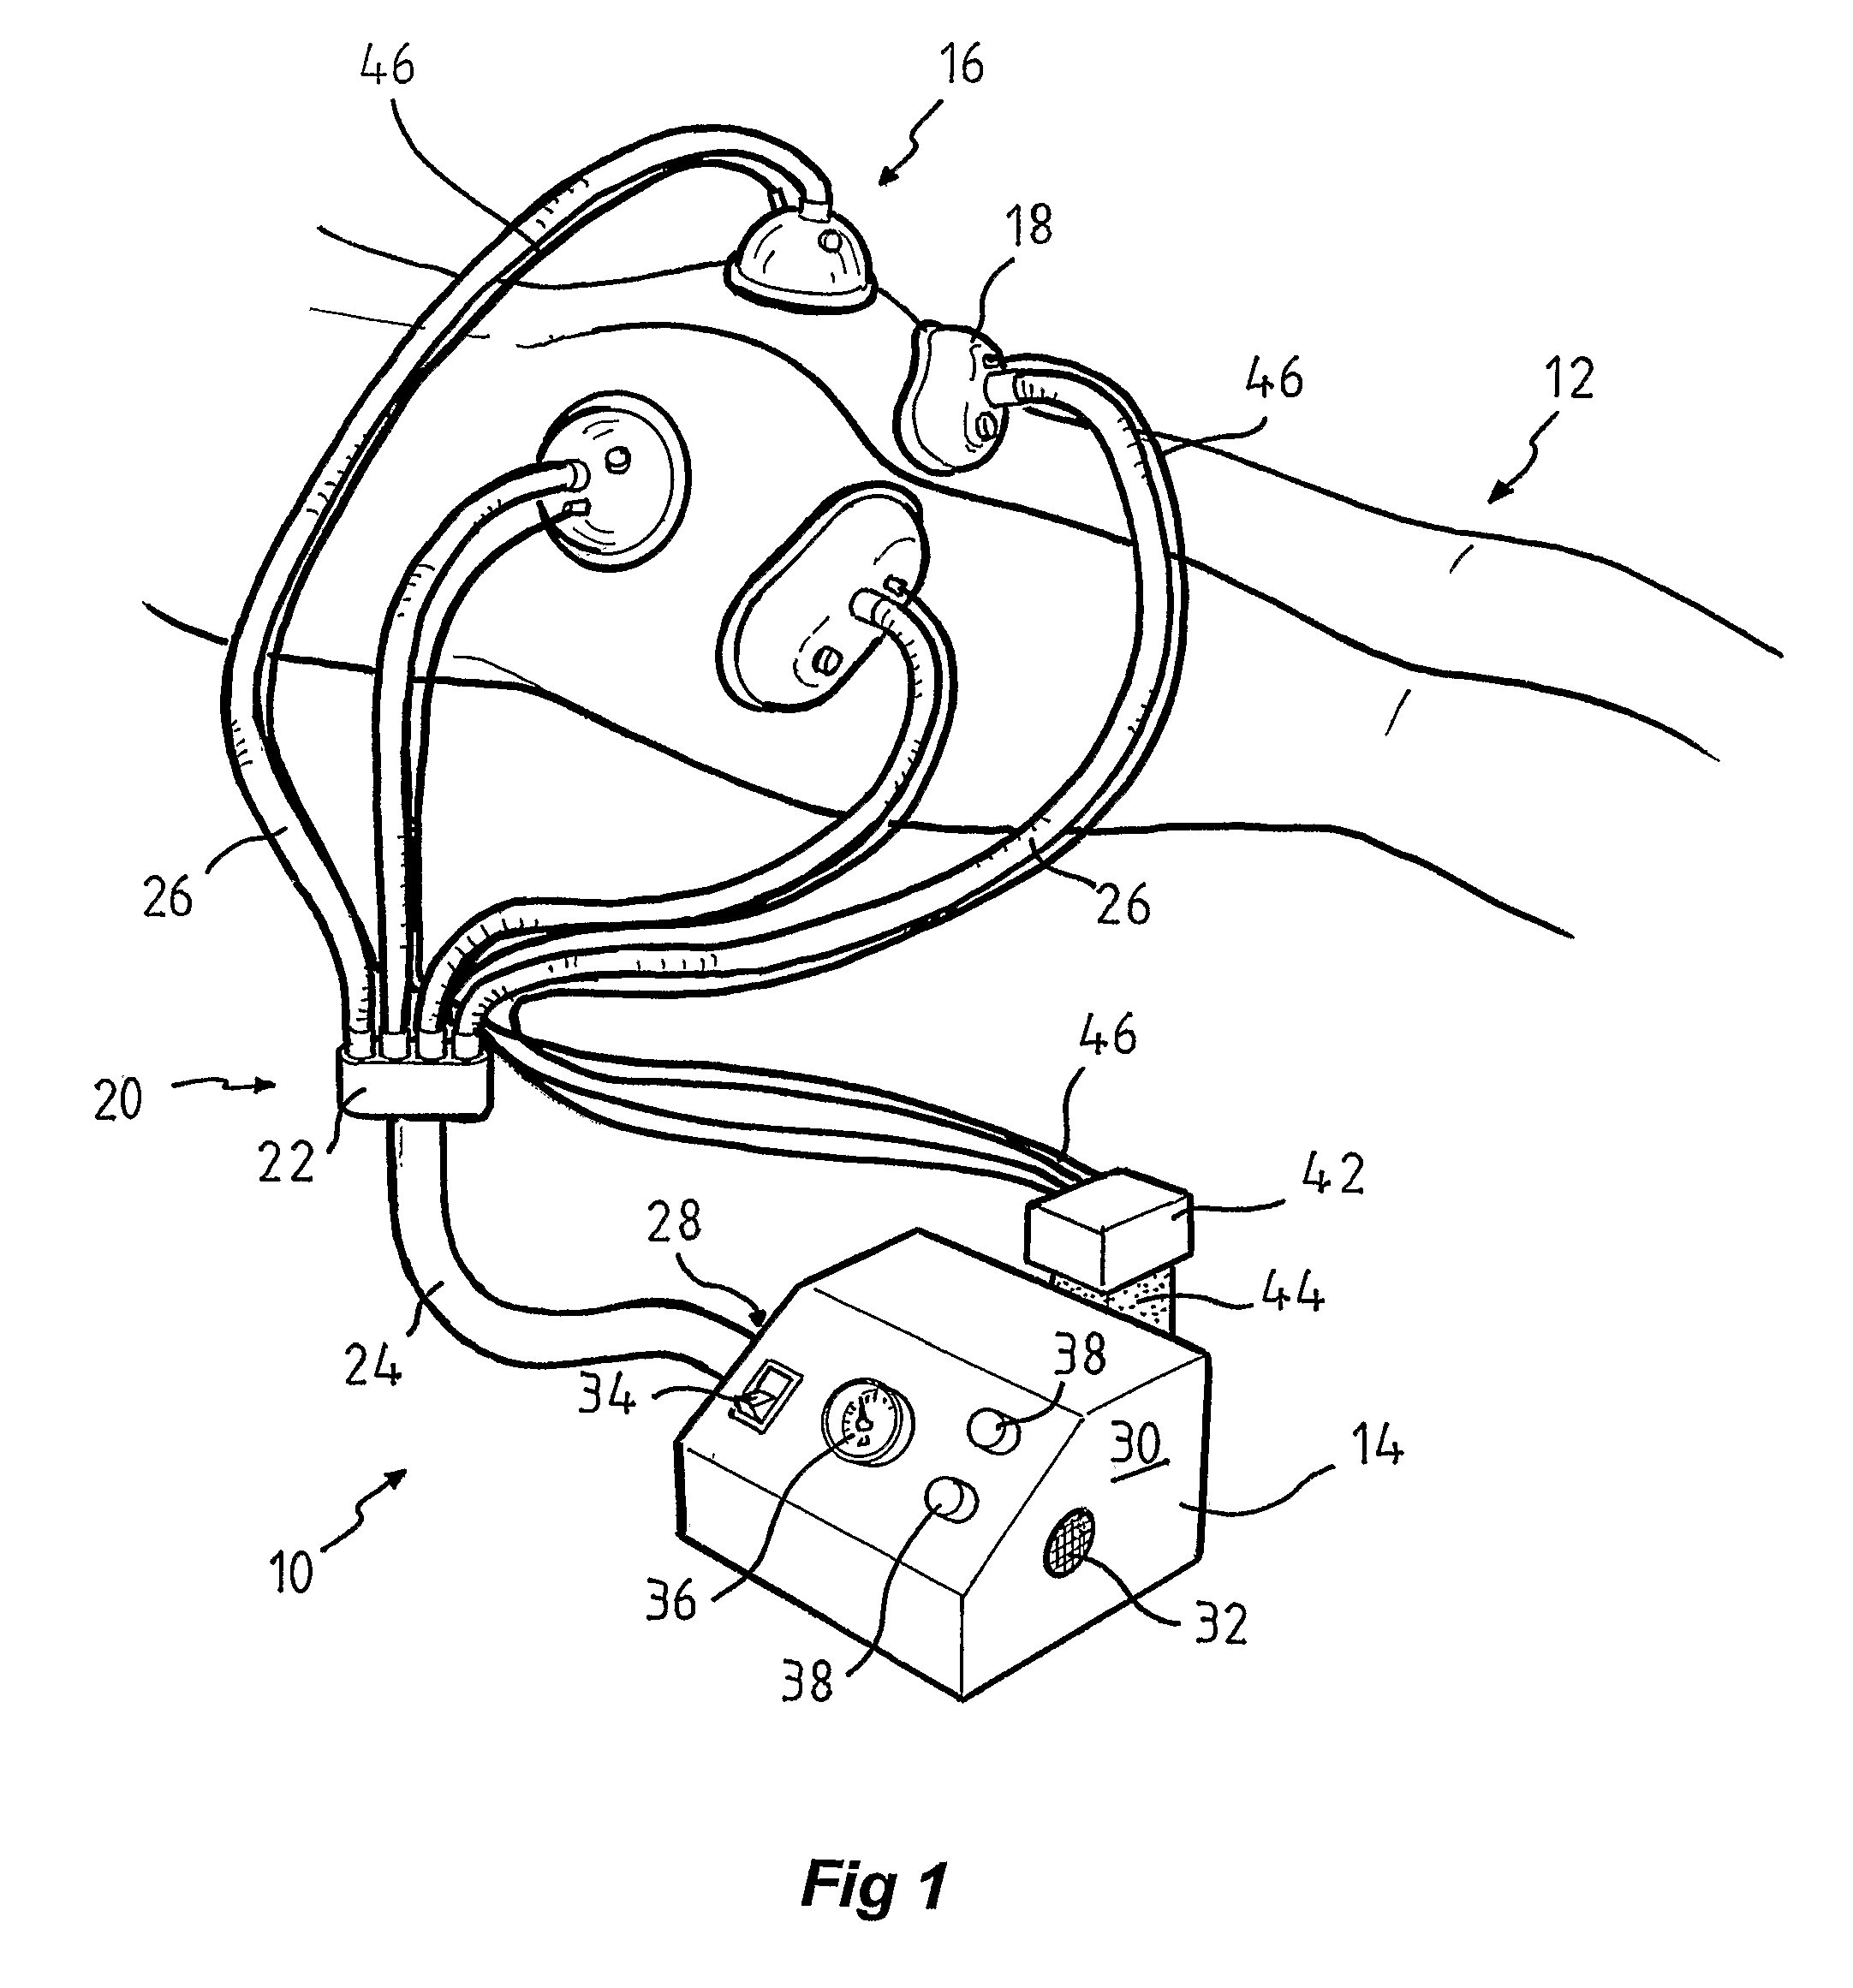 Apparatus and Method of Body Contouring and Skin Conditioning